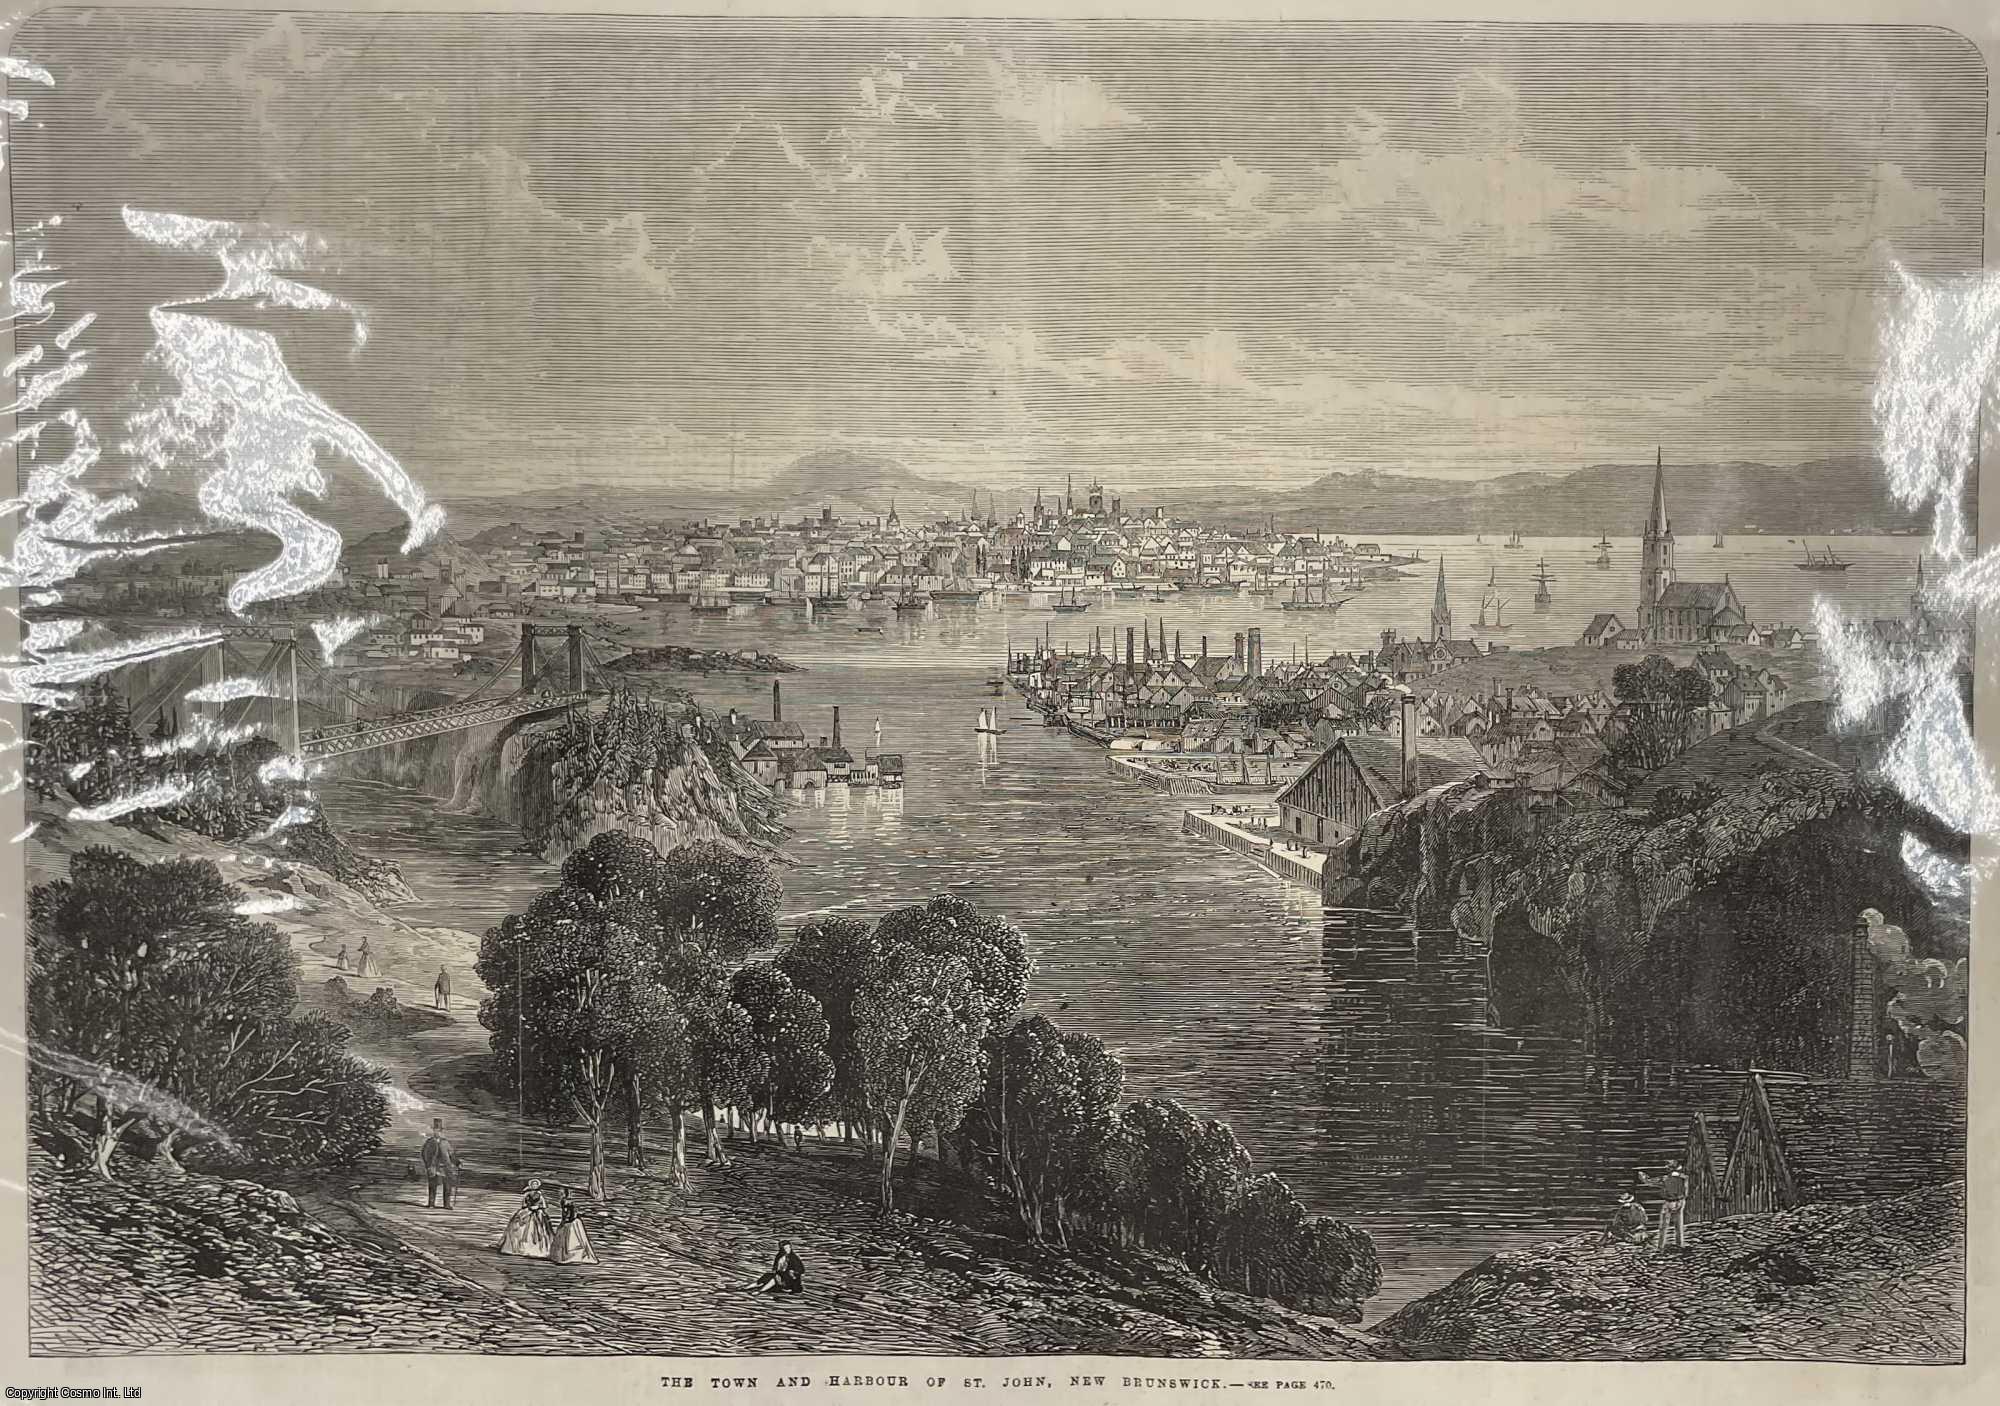 CANADA - The Town and Harbour of St. John, New Brunswick. An original print from the Illustrated London News, 1866.